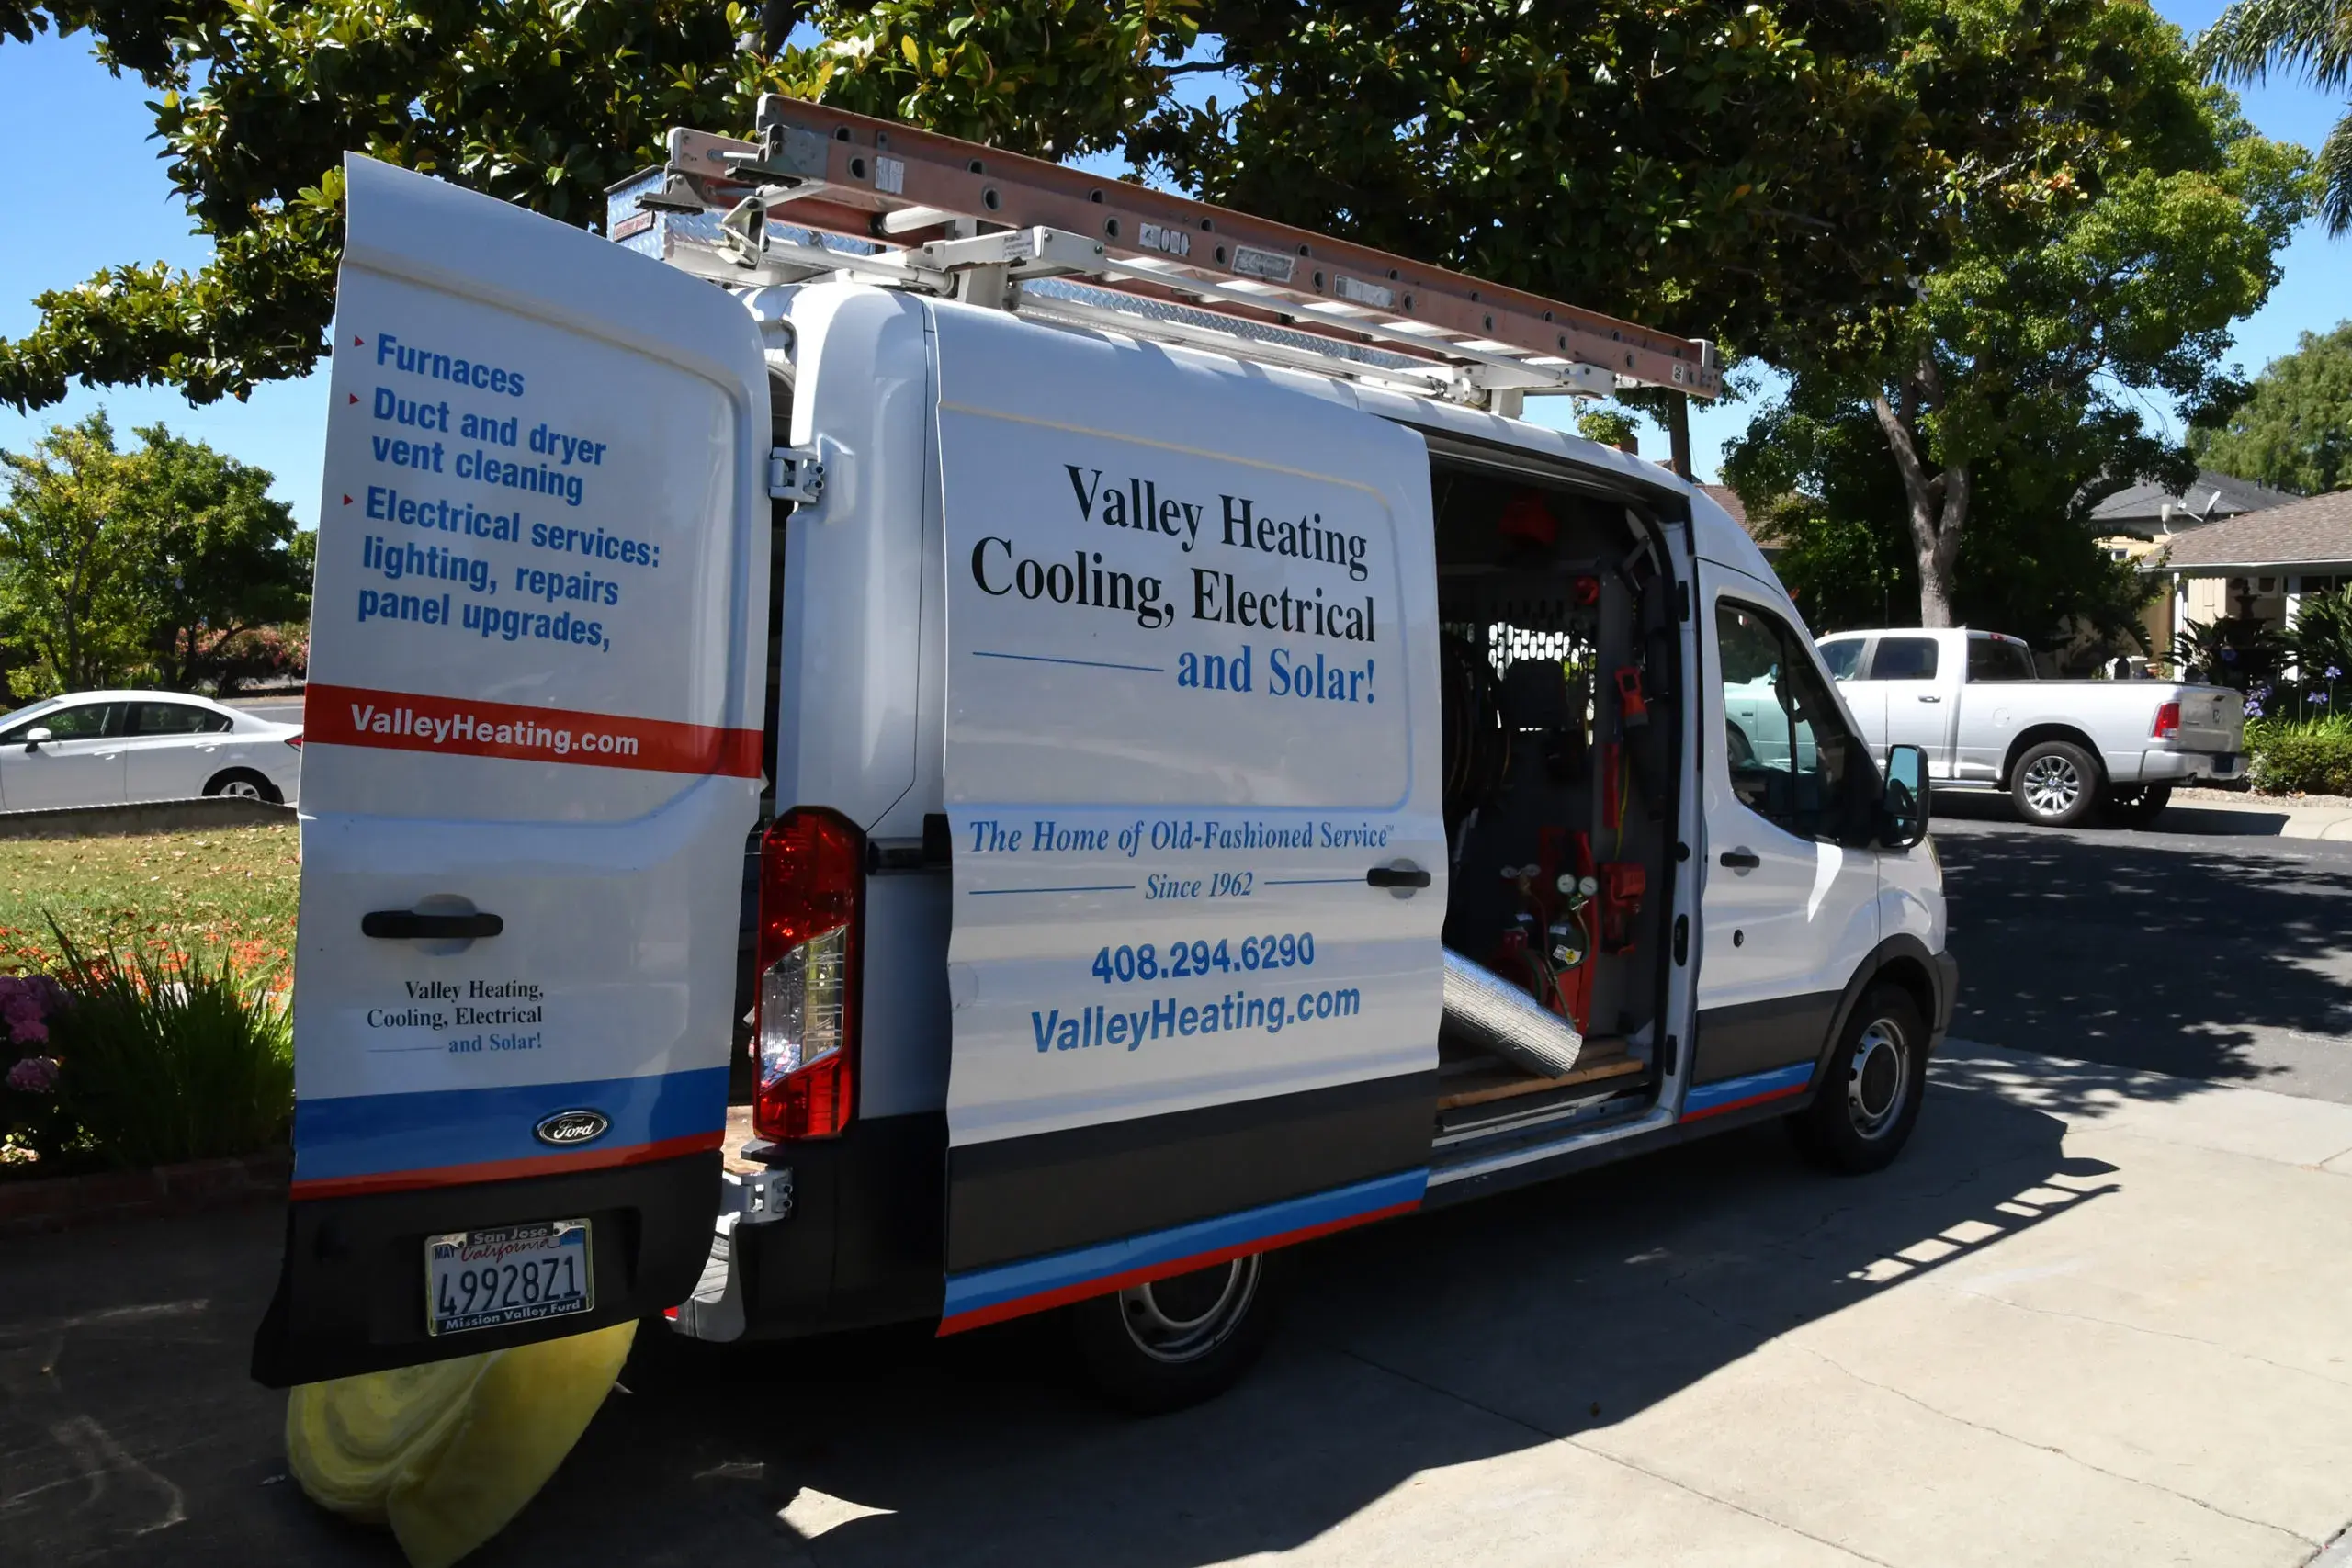 Picture of Valley Heating, Cooling, Electrical and Solar - Valley Heating, Cooling, Electrical and Solar